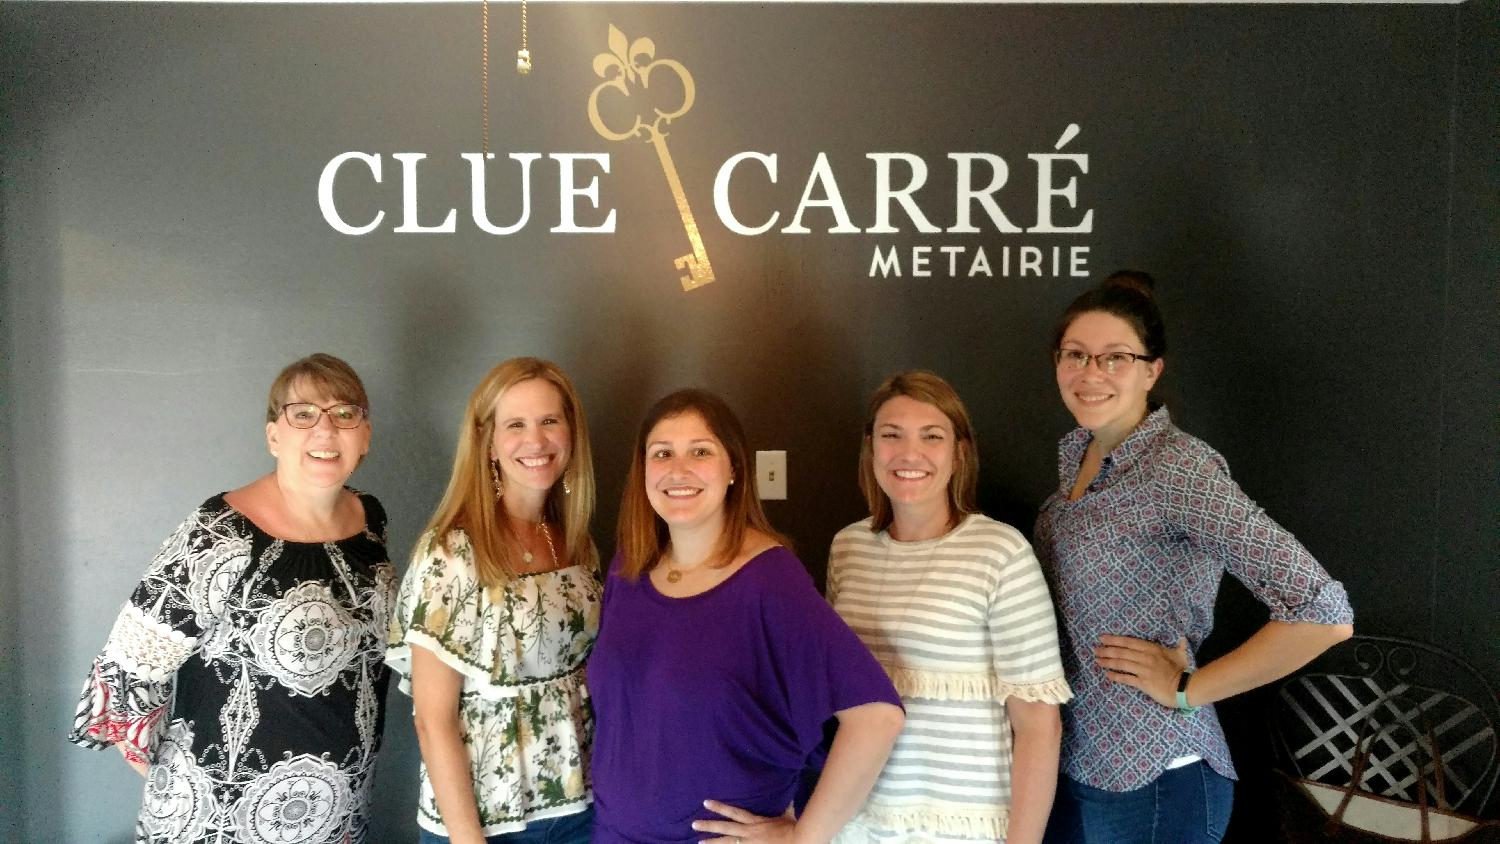 Staff Event at Clue Carre, Metairie